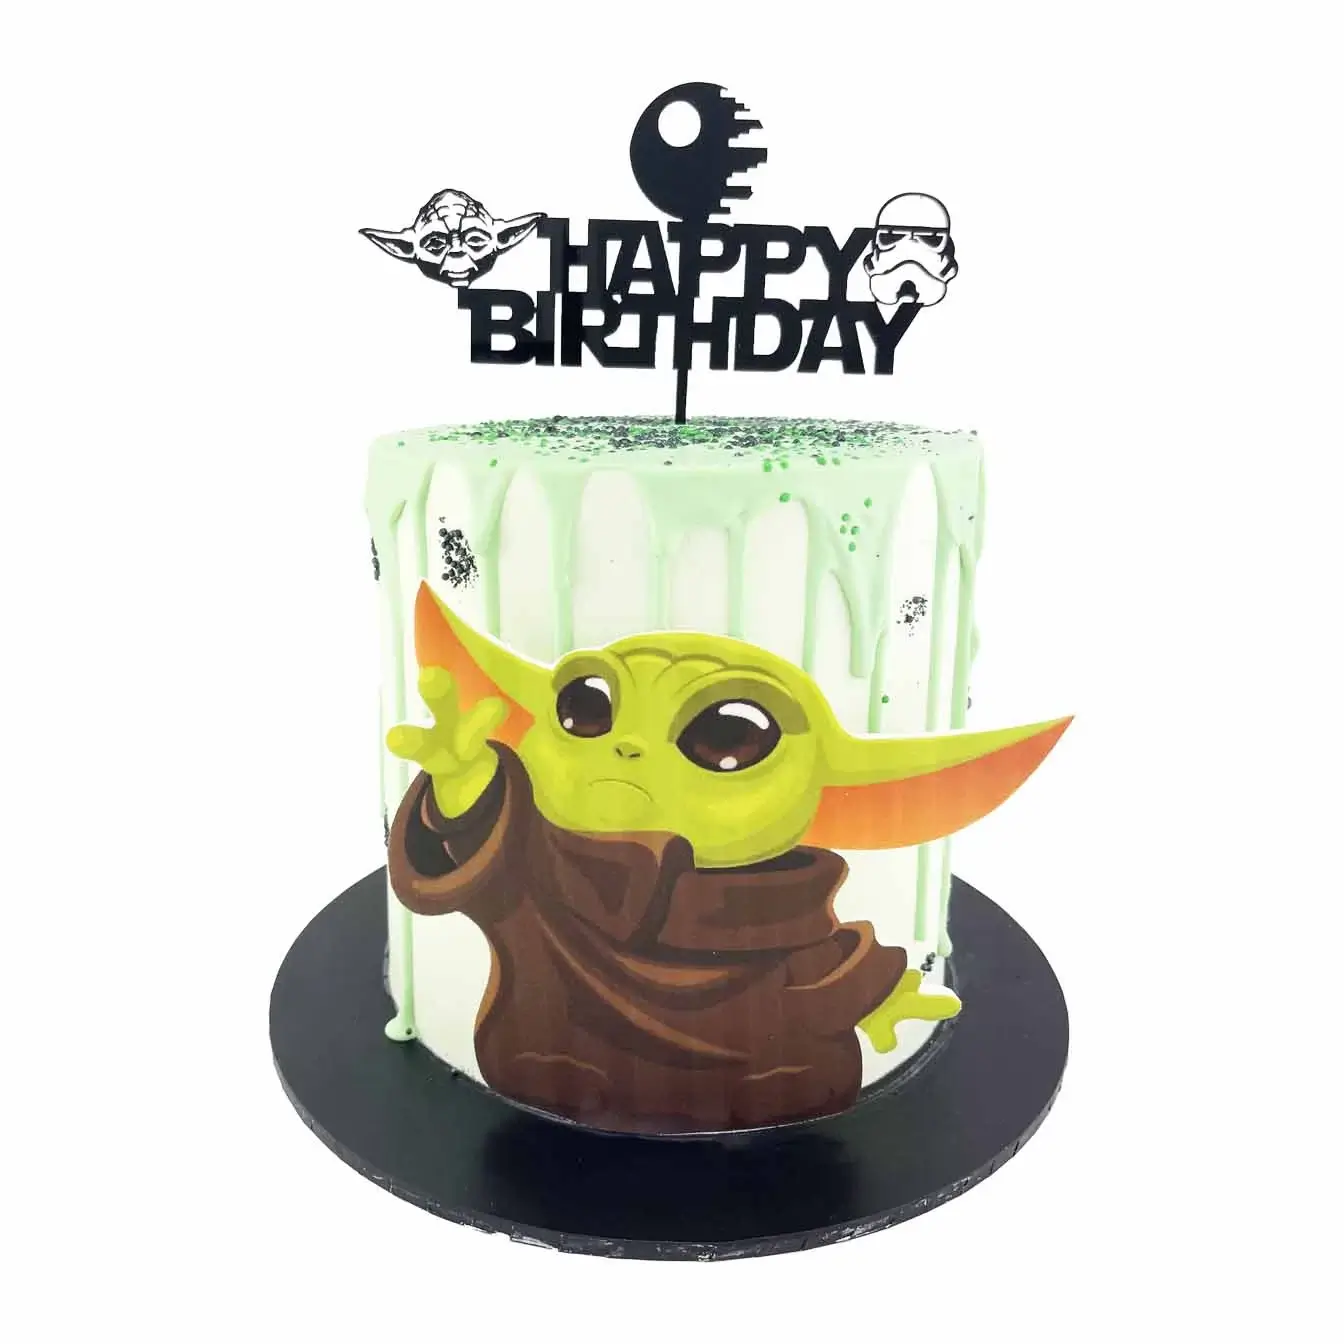 "Jedi Master Yoda Cake" - A green Star Wars-inspired cake with a personalised cake topper and an edible image of Yoda on the front. Perfect for any occasion!